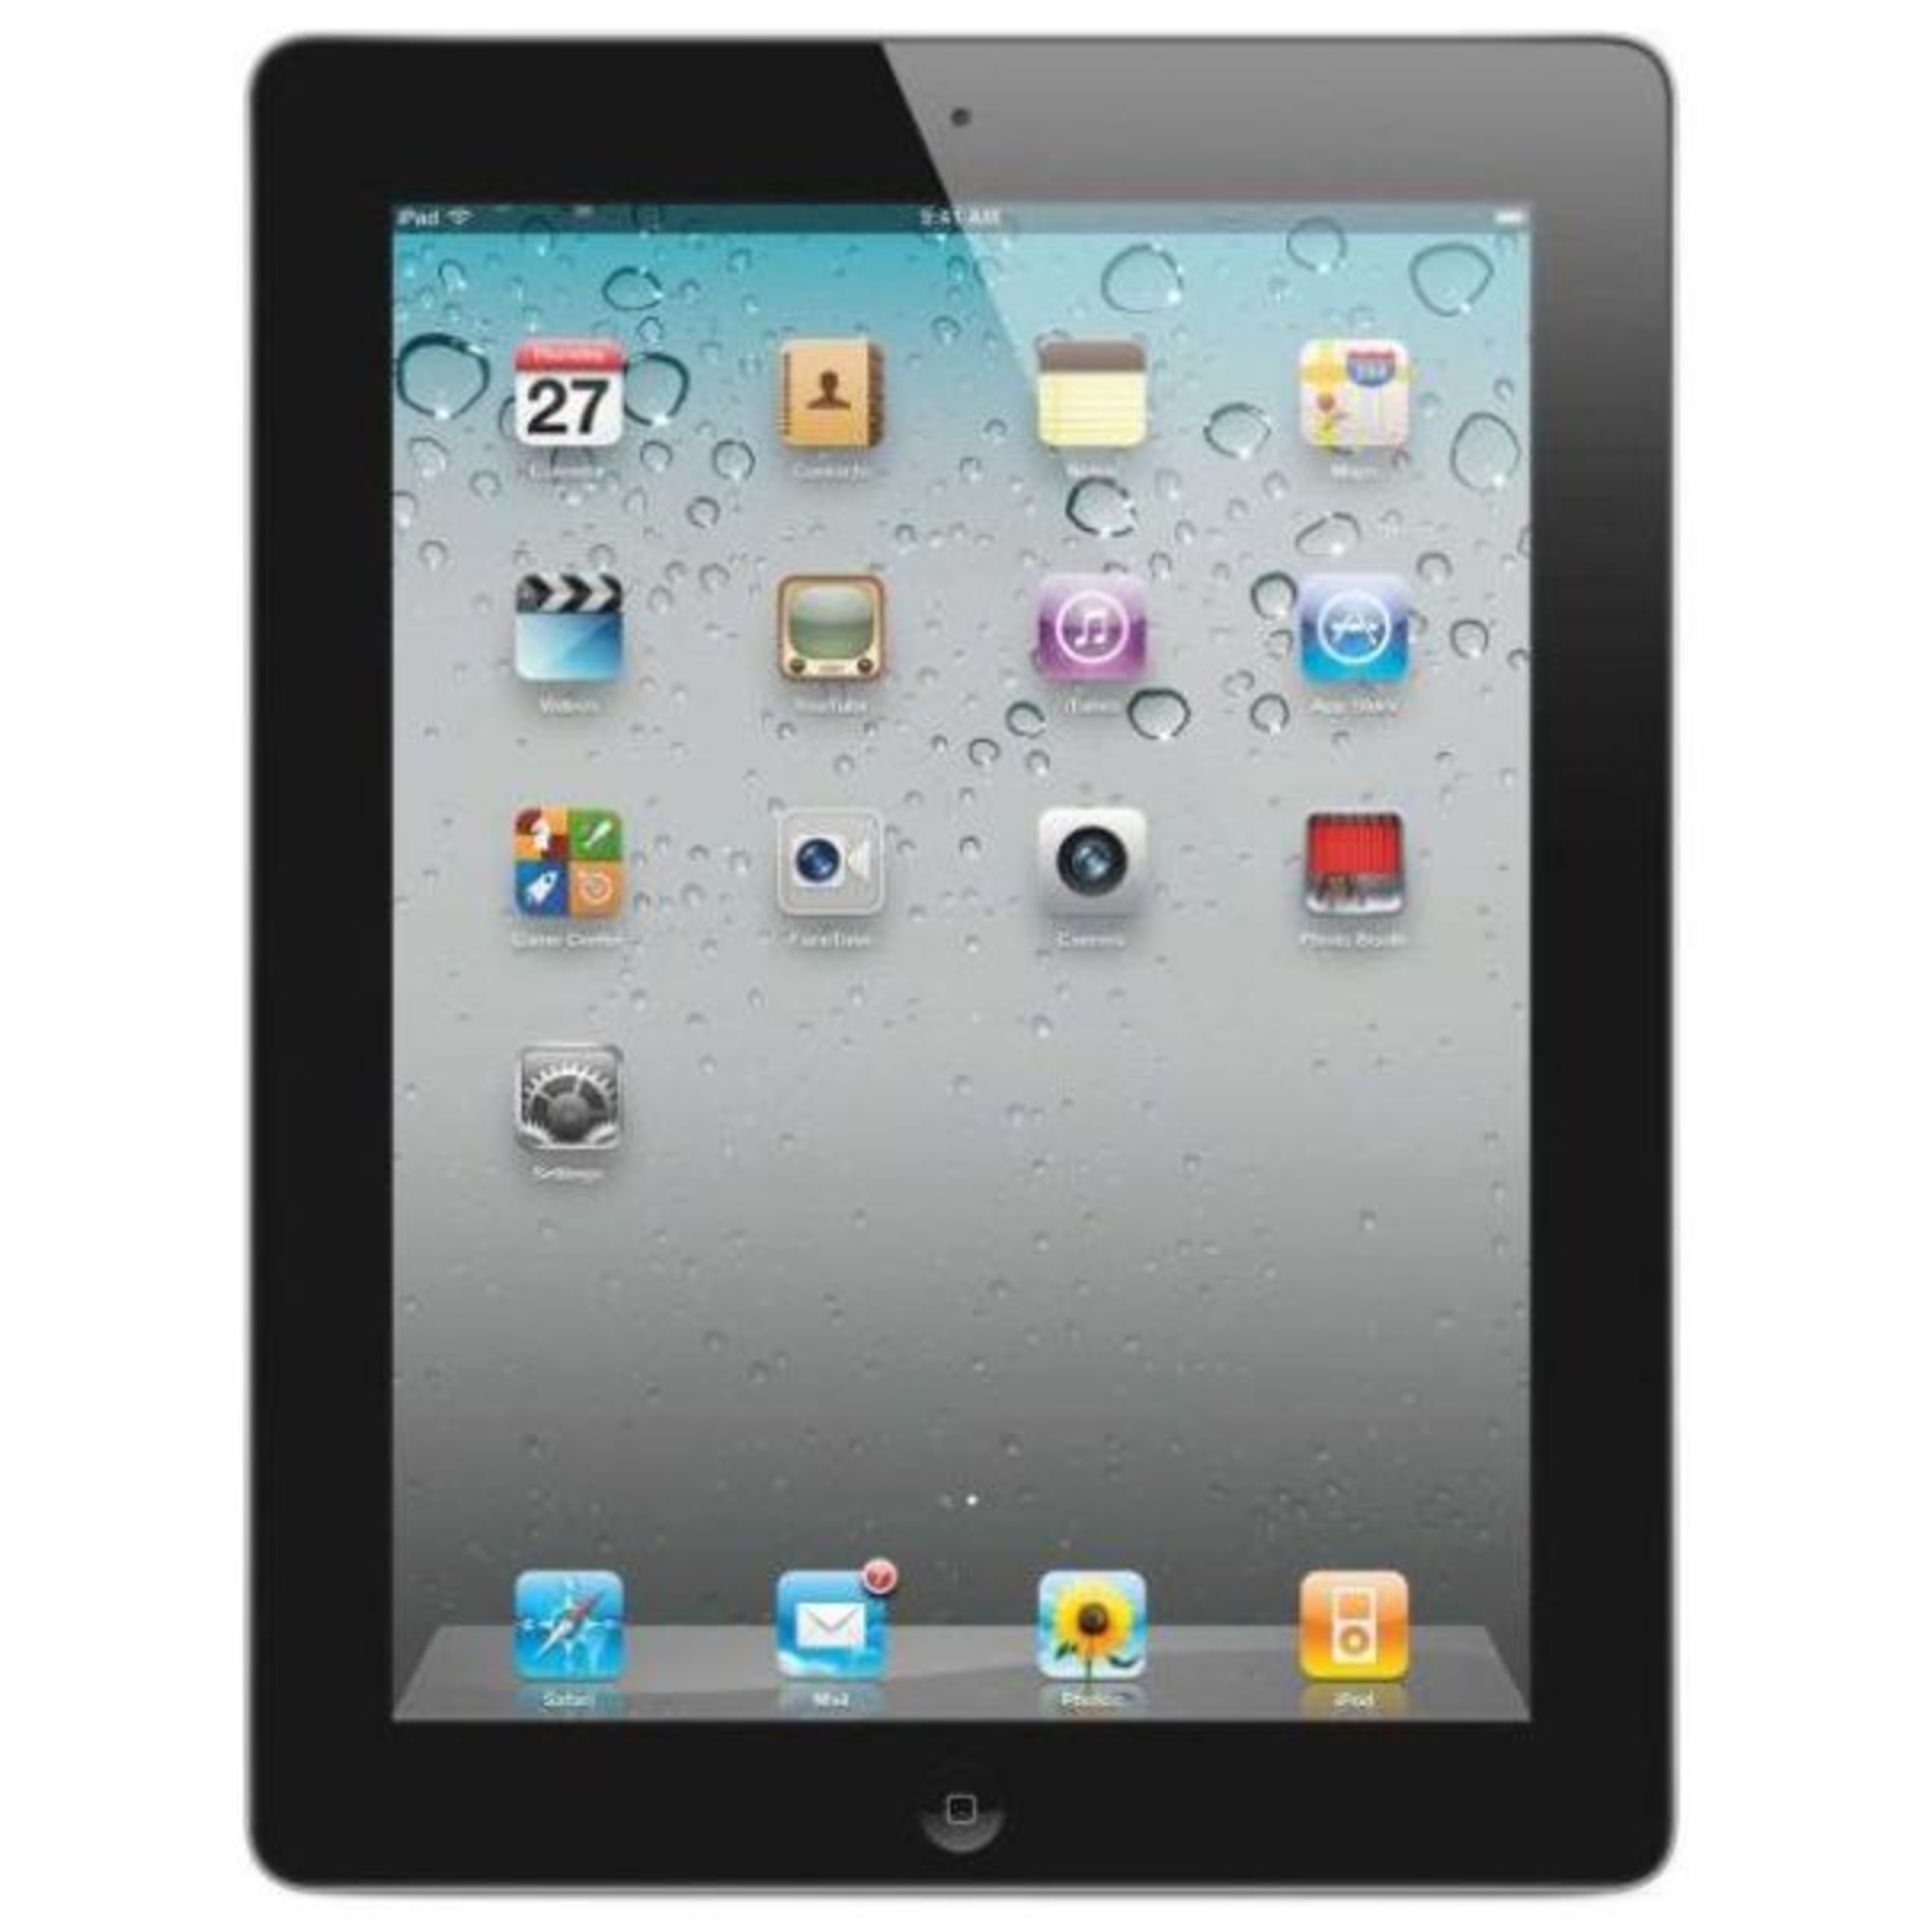 V Apple iPad 2 64Gb White 3G & WiFi - Lead & Charger Not In Original Box